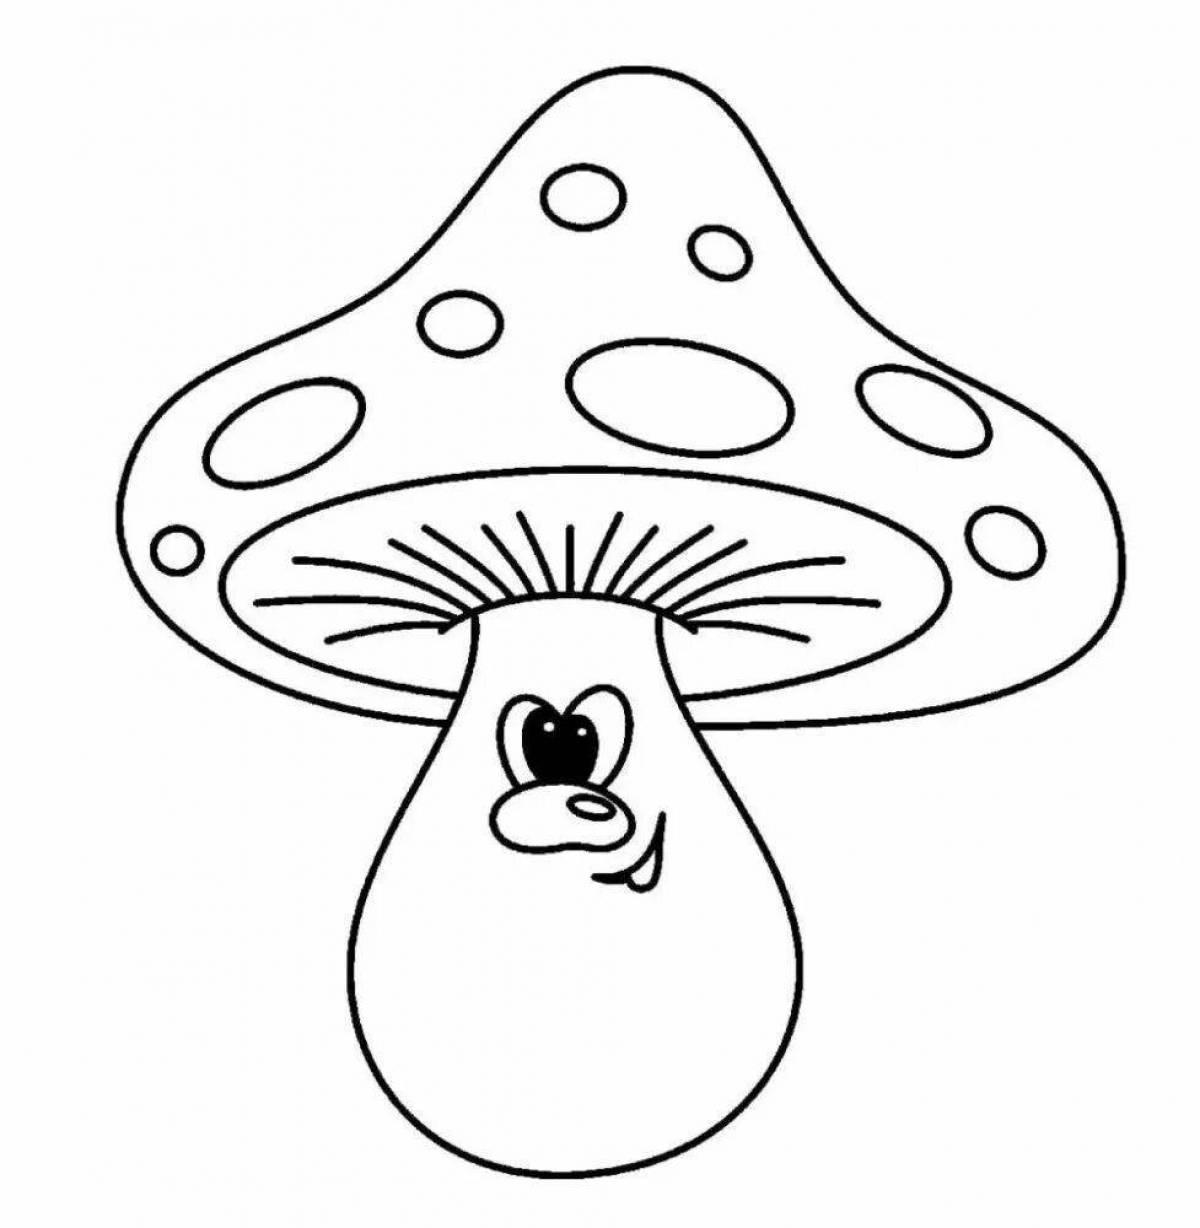 Coloring page wild fly agaric frog